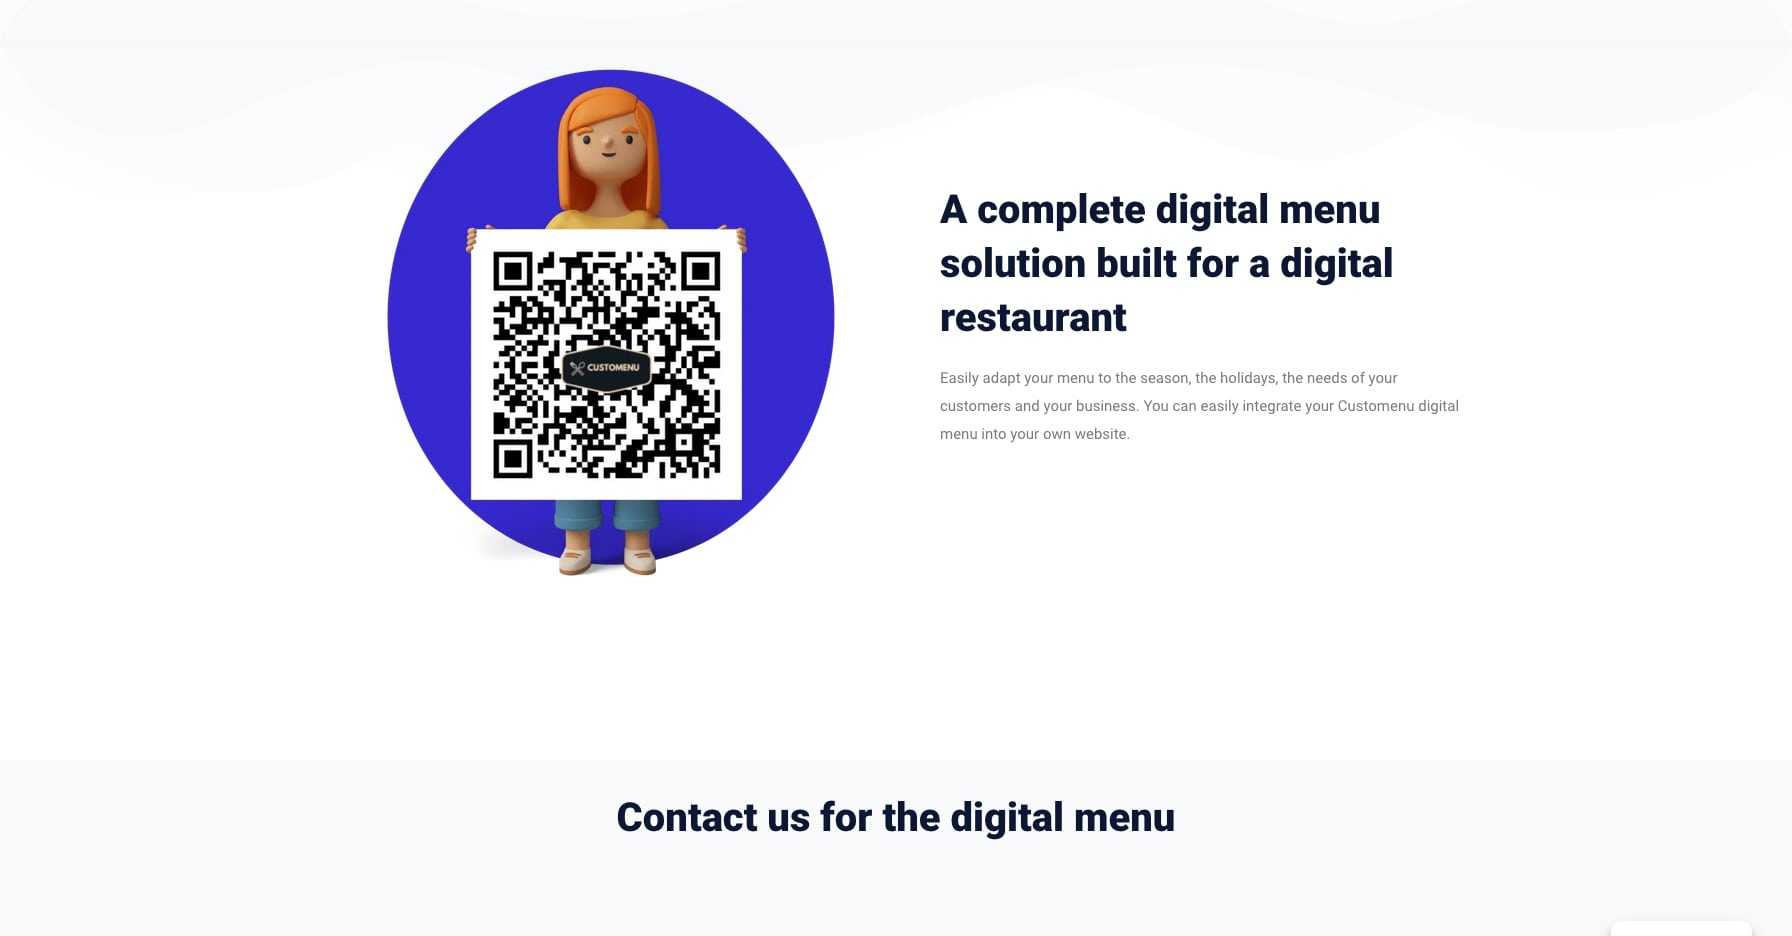 In order to provide a complete experience, we have given everyone the opportunity to scan a demo qr code to understand the whole process of displaying the digital menu for restaurants.